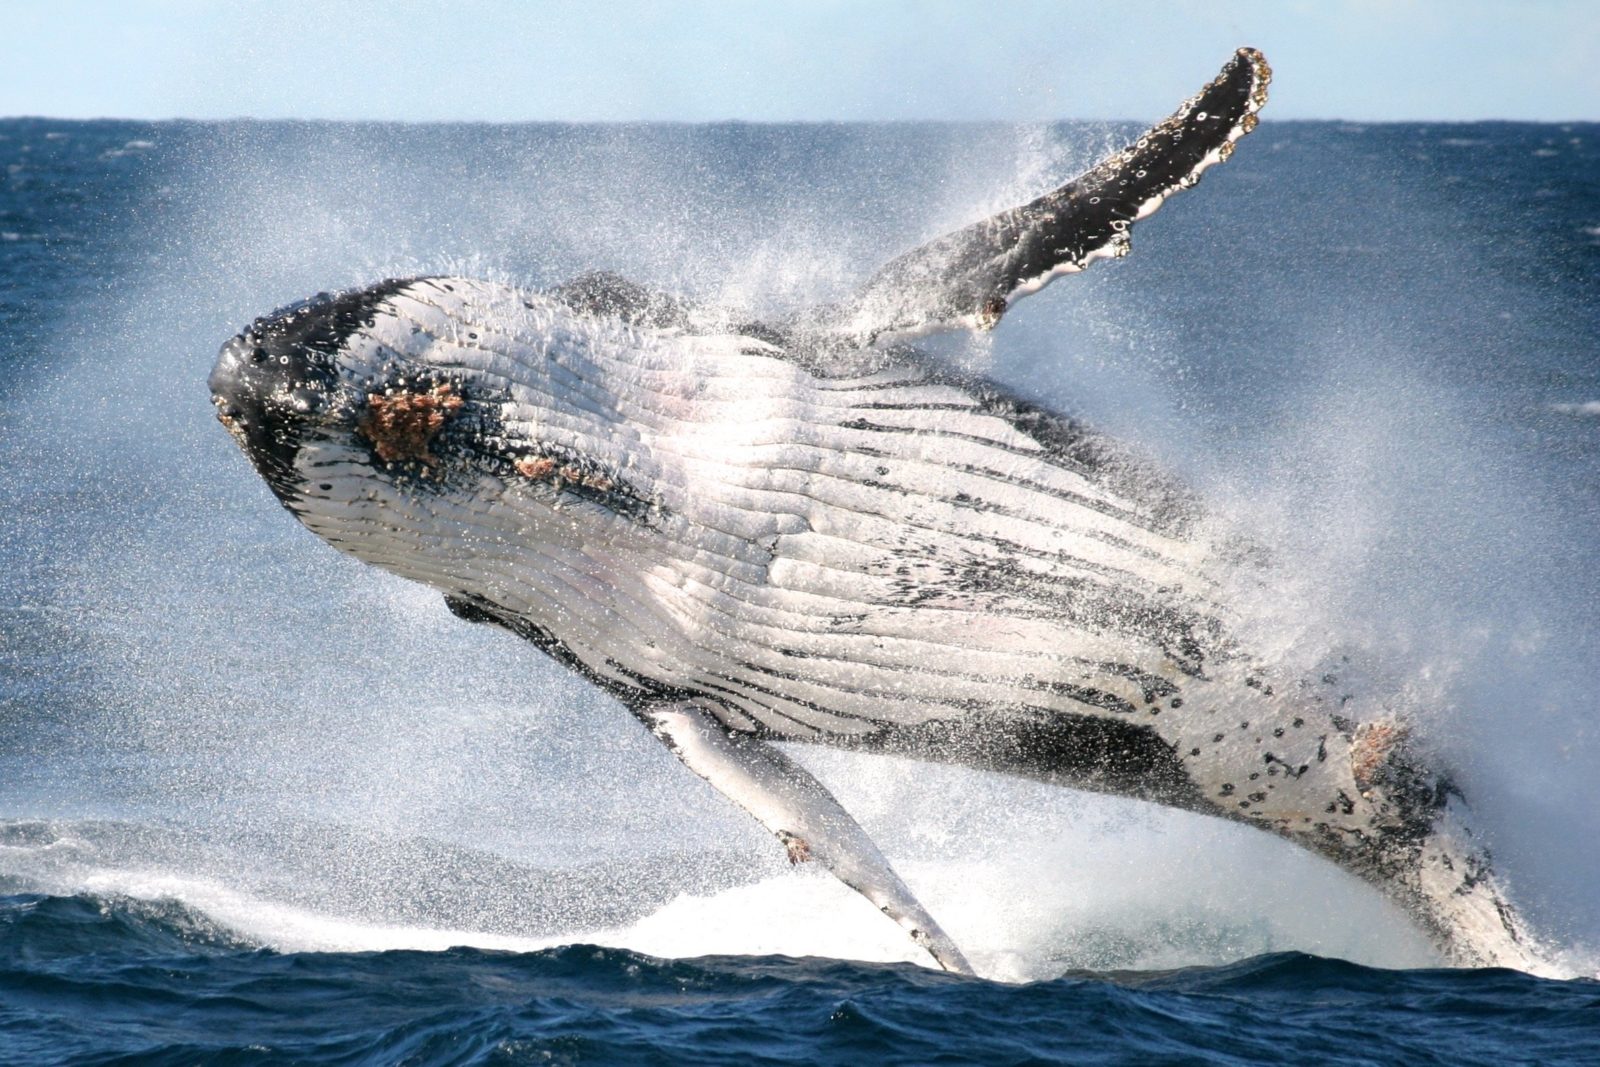 Go Whale Watching | Attraction Tour | New South Wales - Australia's Guide